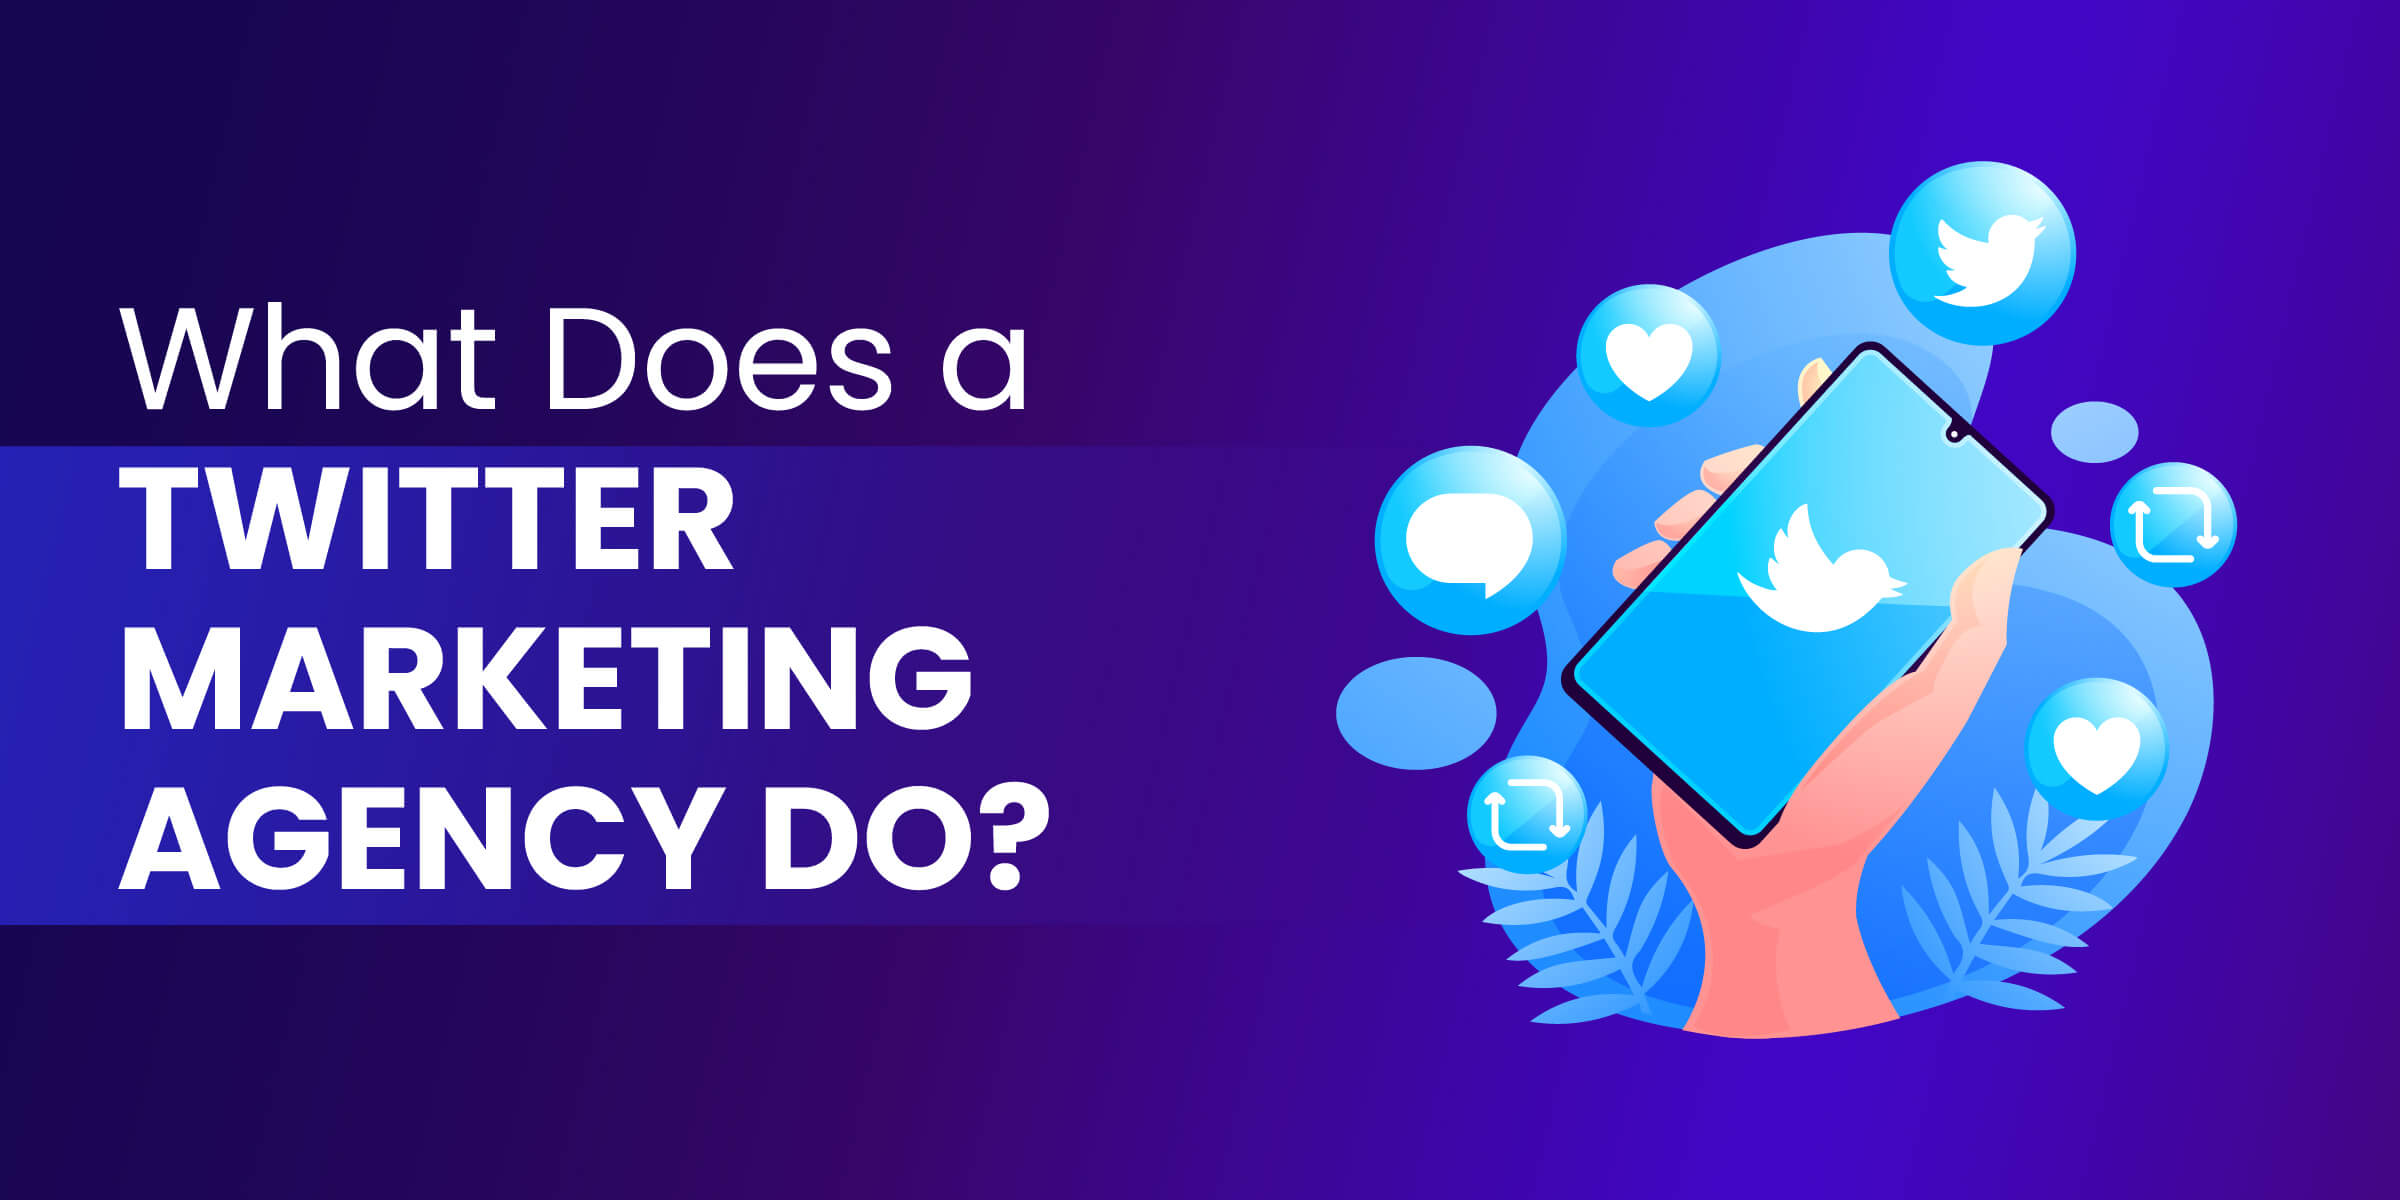 What Does a Twitter Marketing Agency Do